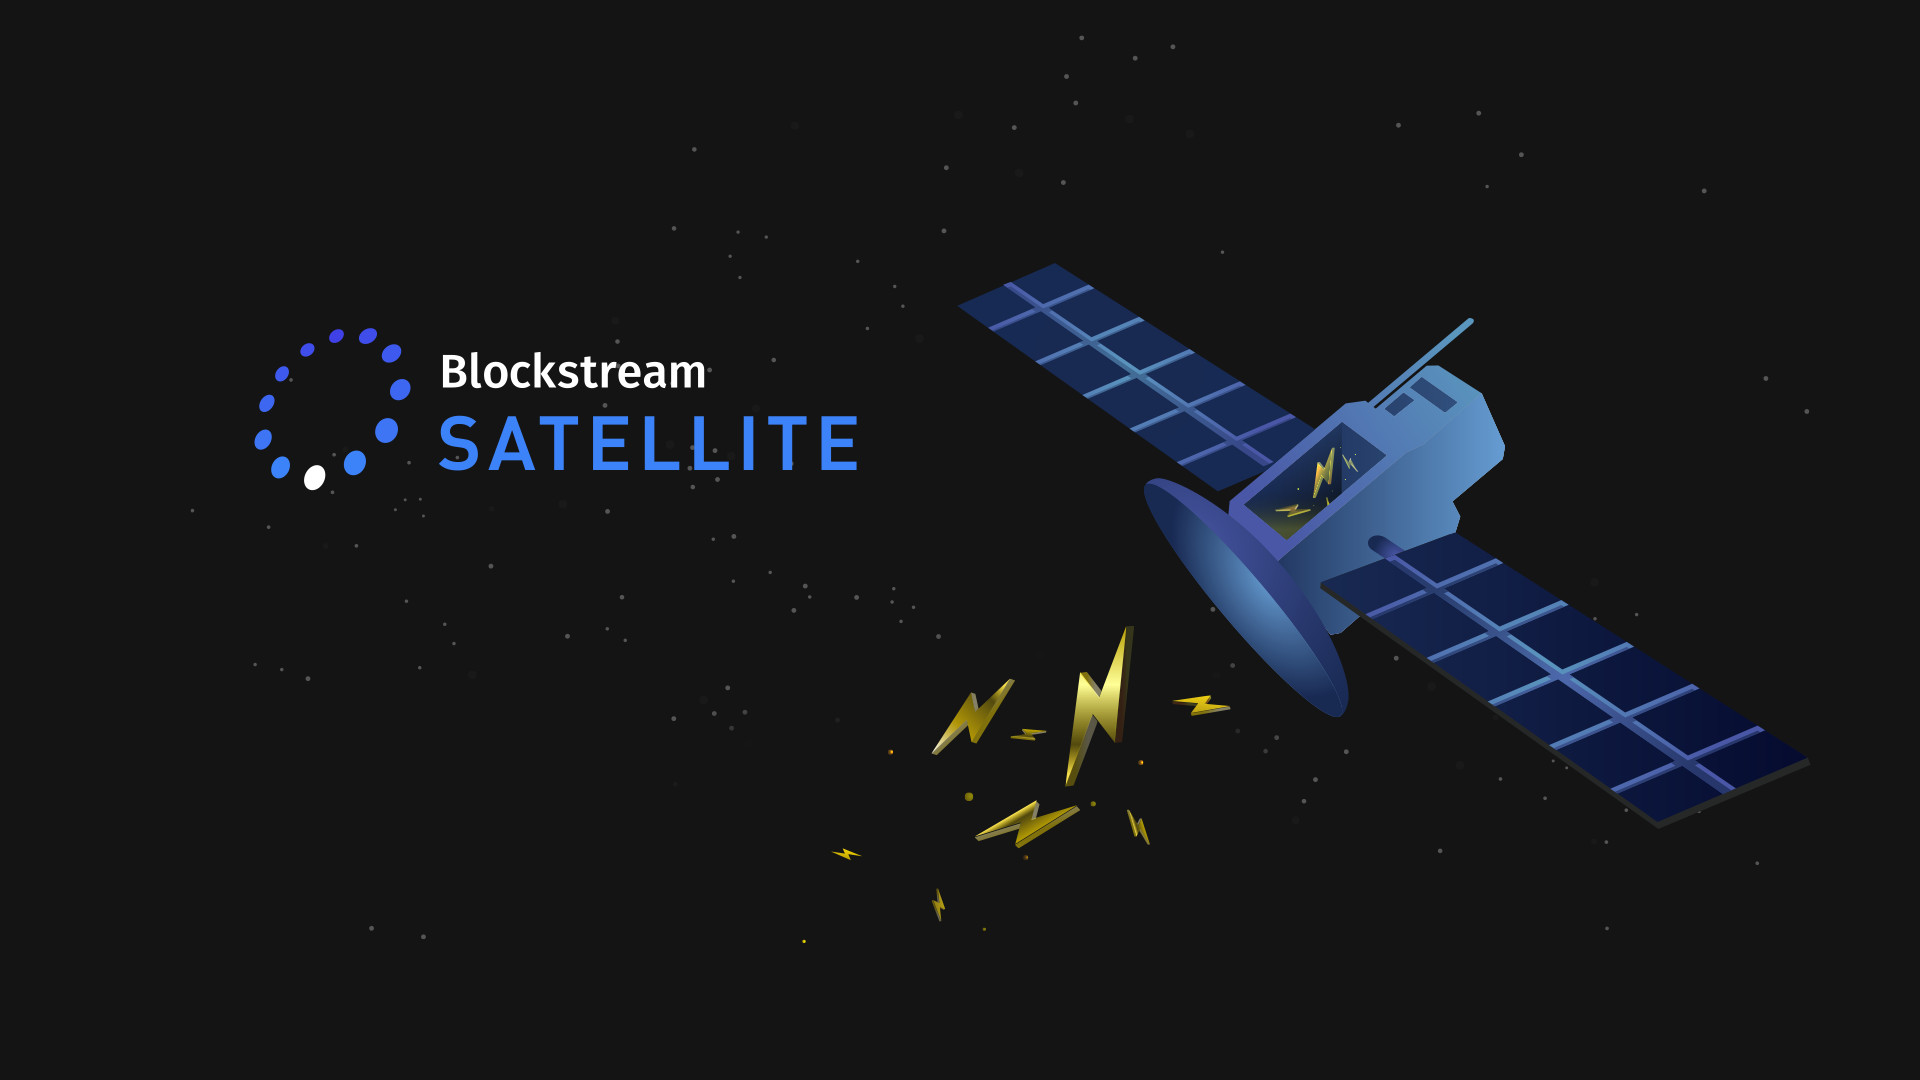 Blockstream Satellite: Bitcoin blockchain broadcasts The Blockstream Satellite network broadcasts the Bitcoin blockchain around the world 24/7 for free, protecting against network interruptions and providing areas without reliable internet connections with the opportunity to use Bitcoin.